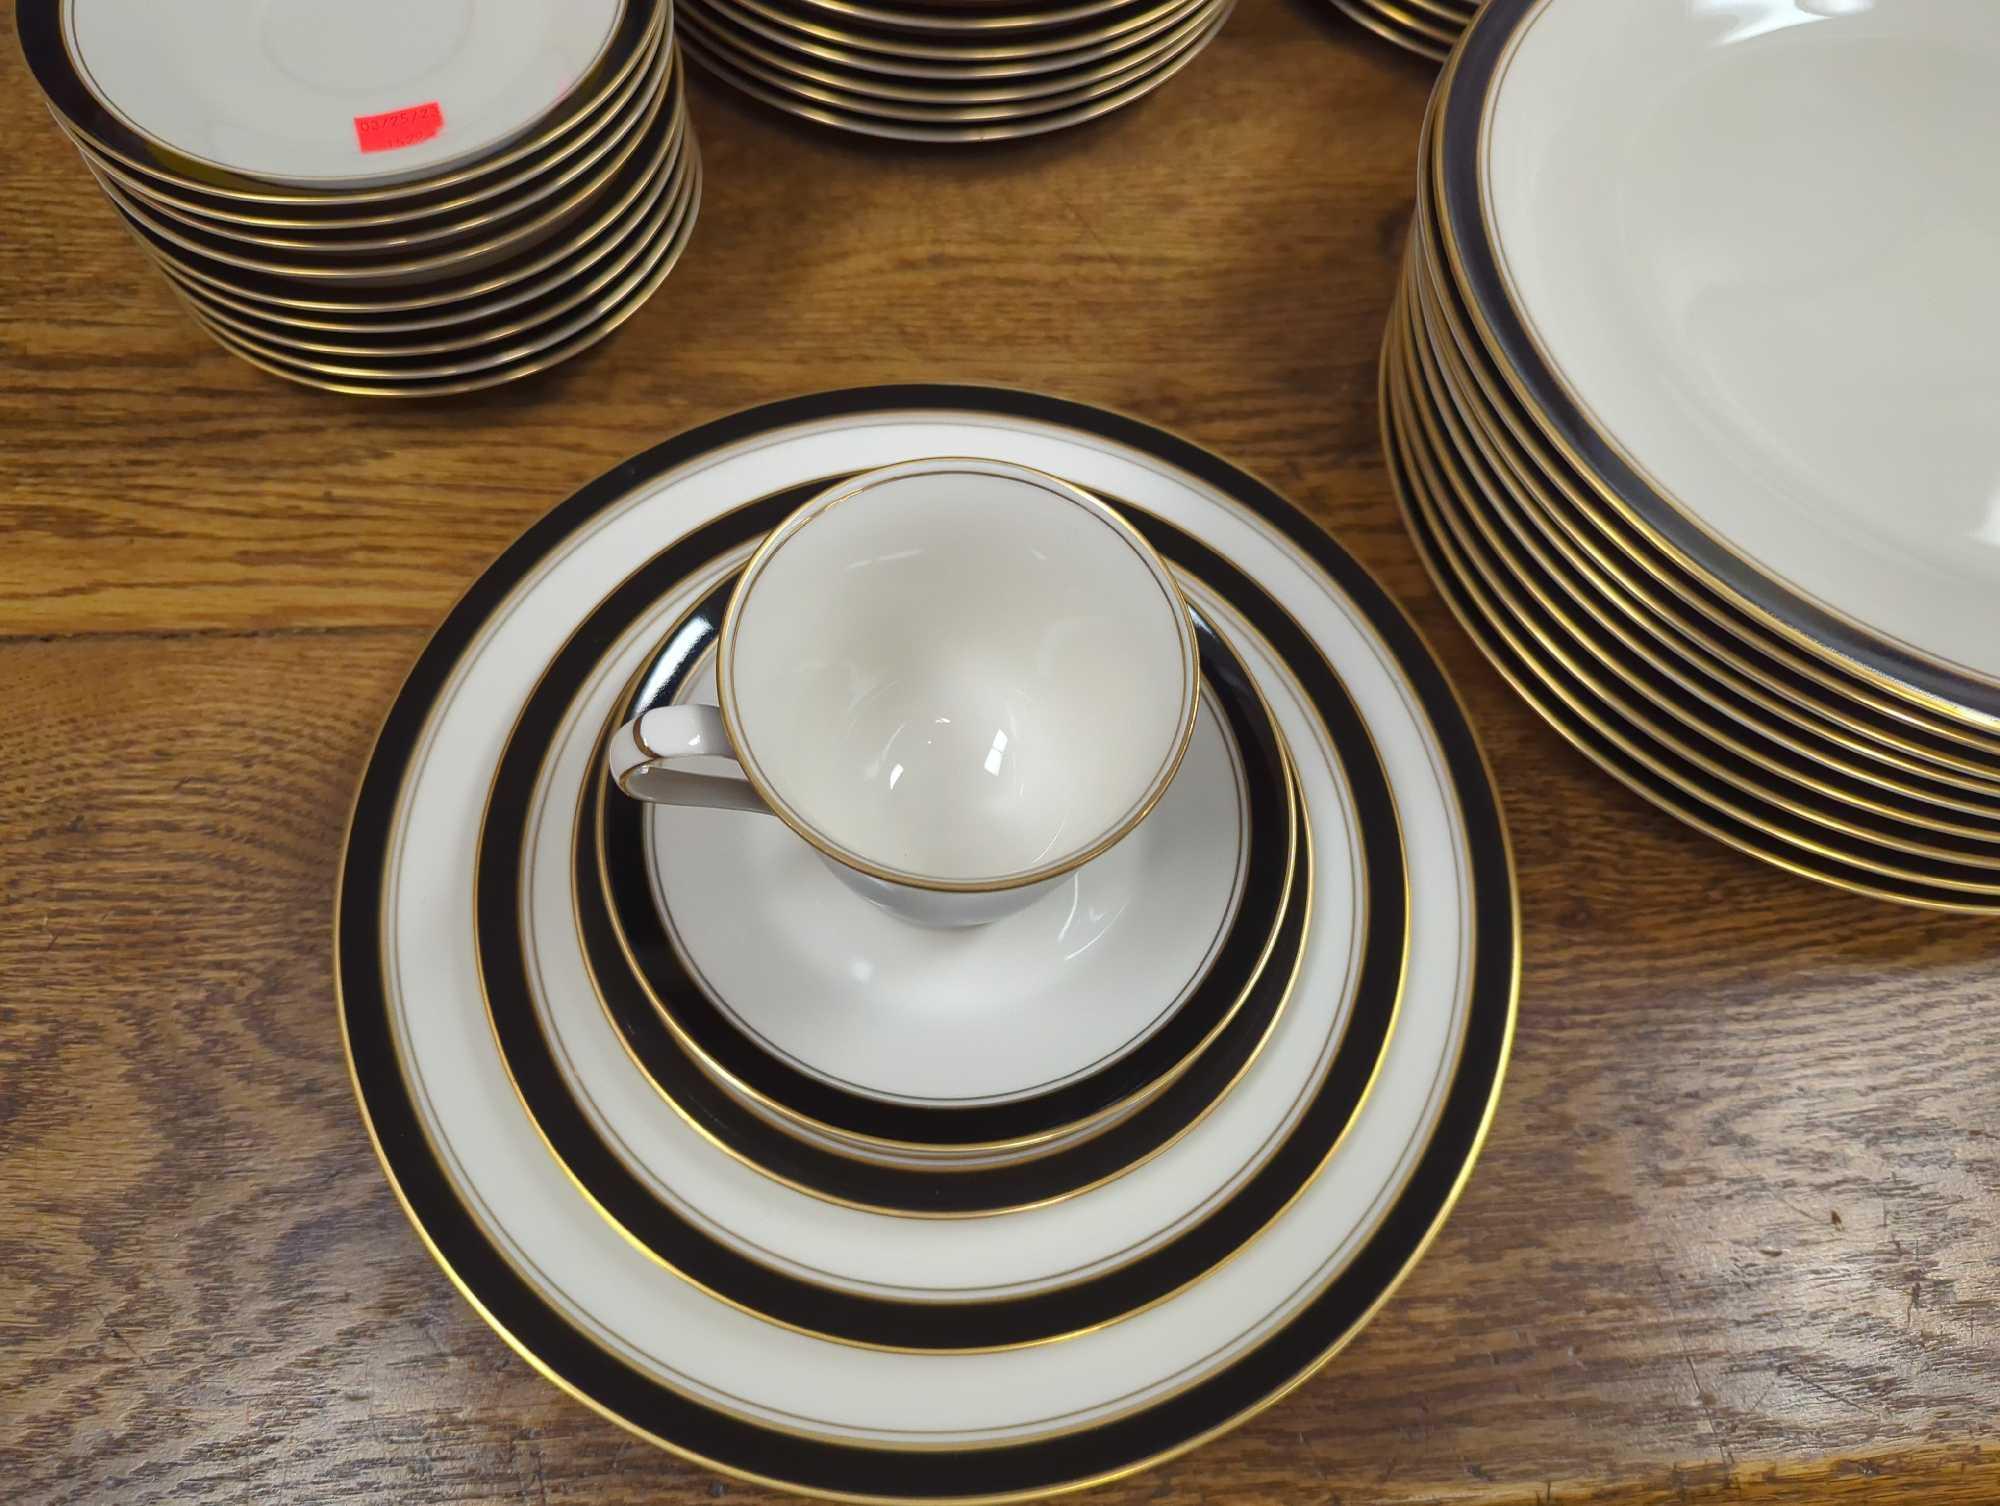 50 Piece Set of 1990s Noritake Ivory China Model 7274 Ivory & Ebony, Made in Japan, Is in Excellent